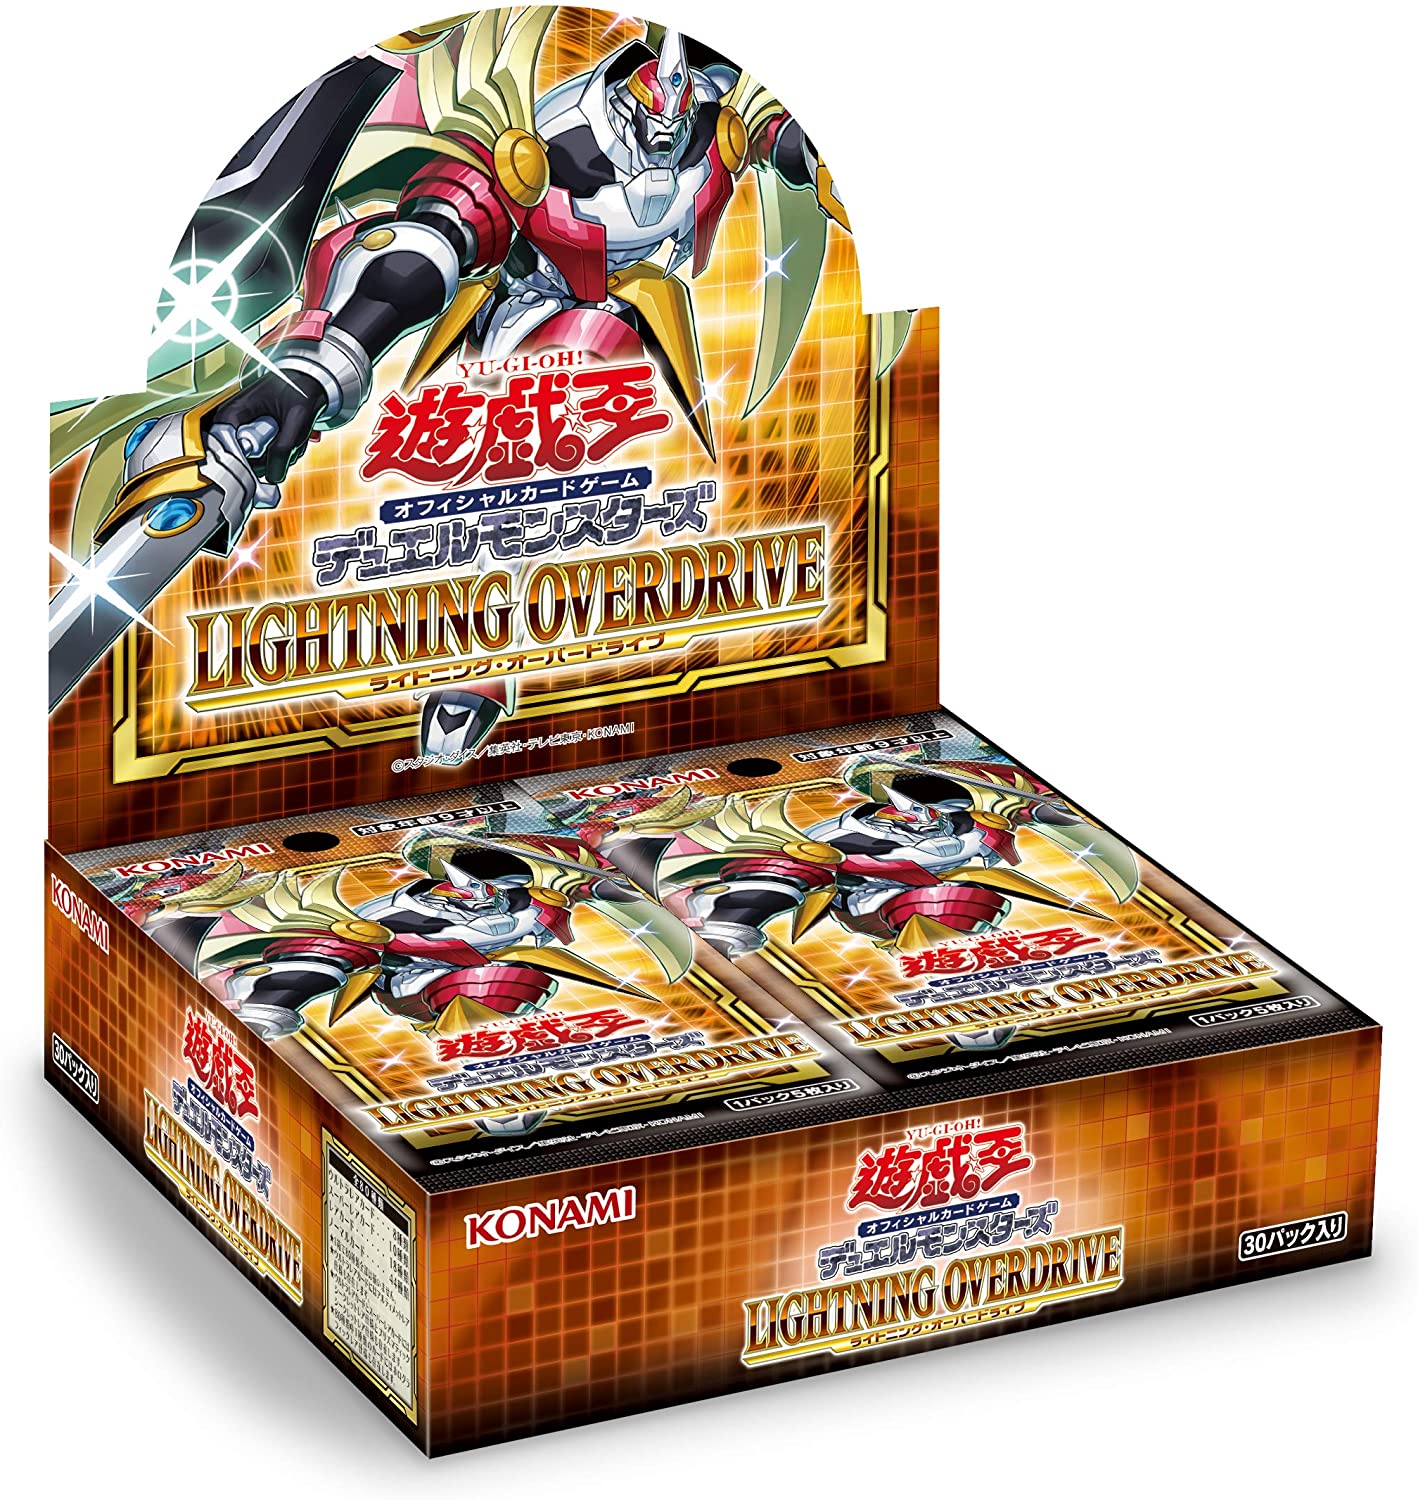 Yu-Gi-Oh! Official Card Game Duel Monsters ｢LIGHTNING OVERDRIVE｣ Box  Release date: April 17 2021  30 pack / box  5 cards / pack